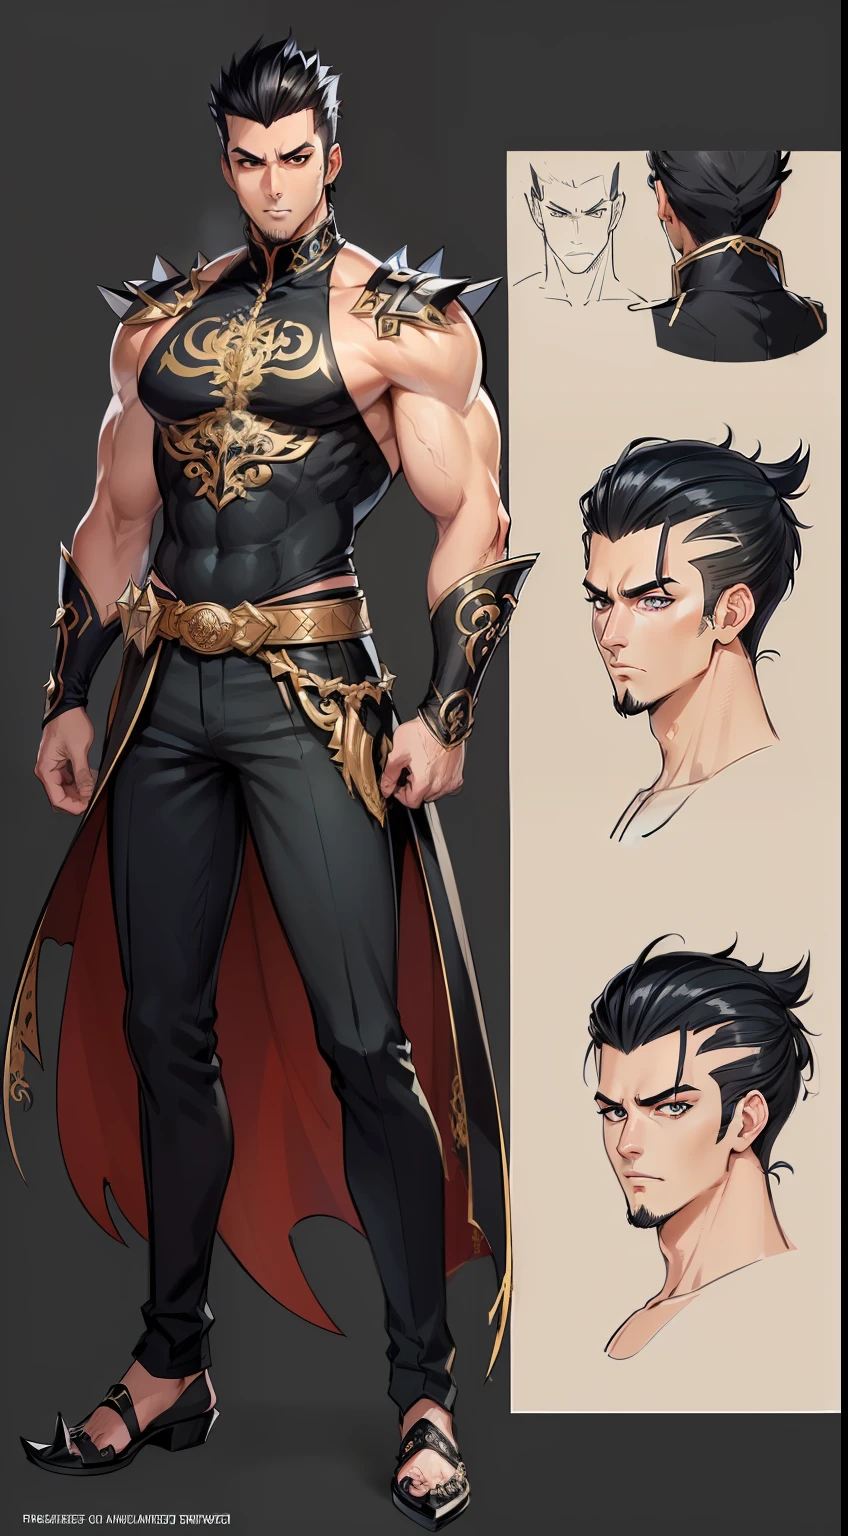 ((highest quality, masterpiece, 4k, finely detailed, detailed eyes, detailed face, intricate details, pixiv, gelbooru)), (((reference sheet, full body pose))), male, spikey hairstyle, black hair, revealing clothing, sharp eyes, intense pose, handsome sharp features, masculine, muscular, hairy, manly